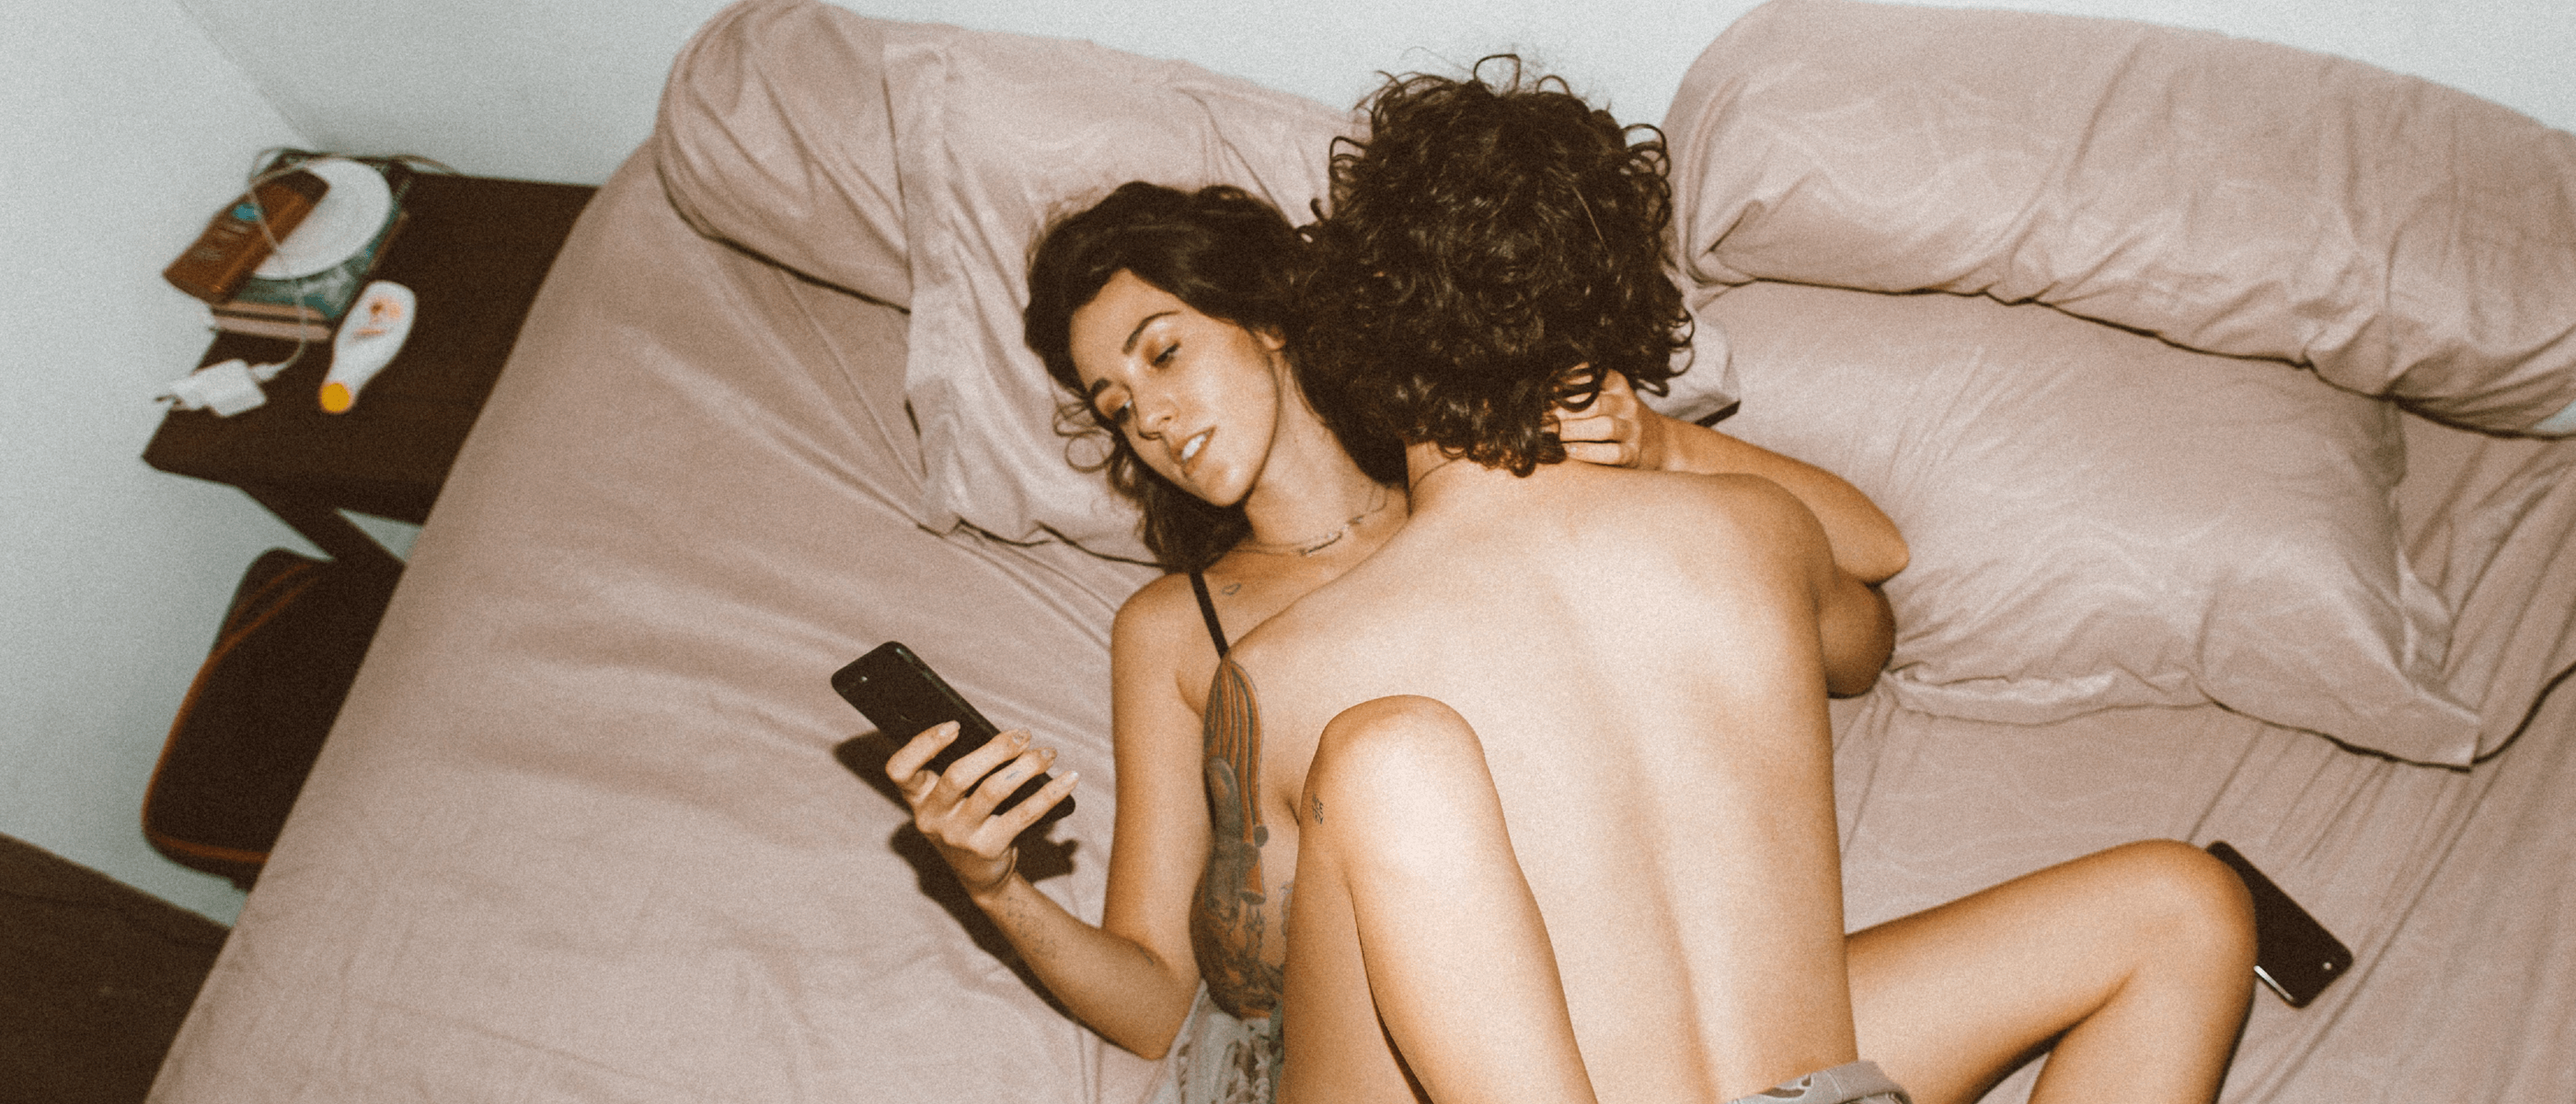 4 Reasons Why Your Libido’s Gone MIA (And How To Find It Again)